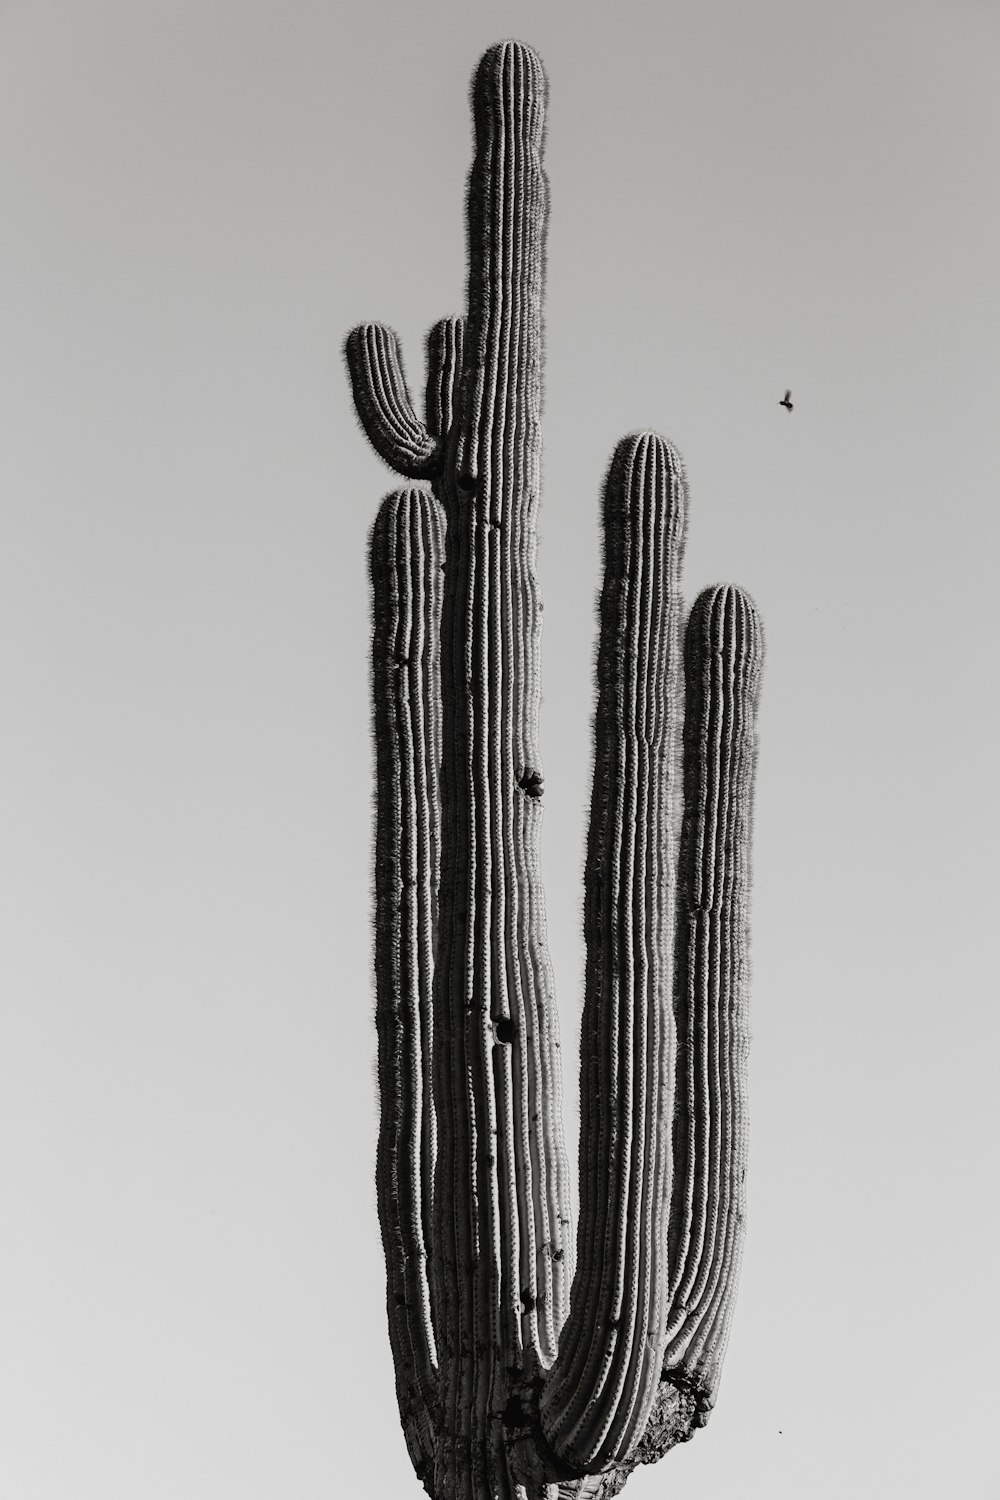 a black and white photo of a large cactus